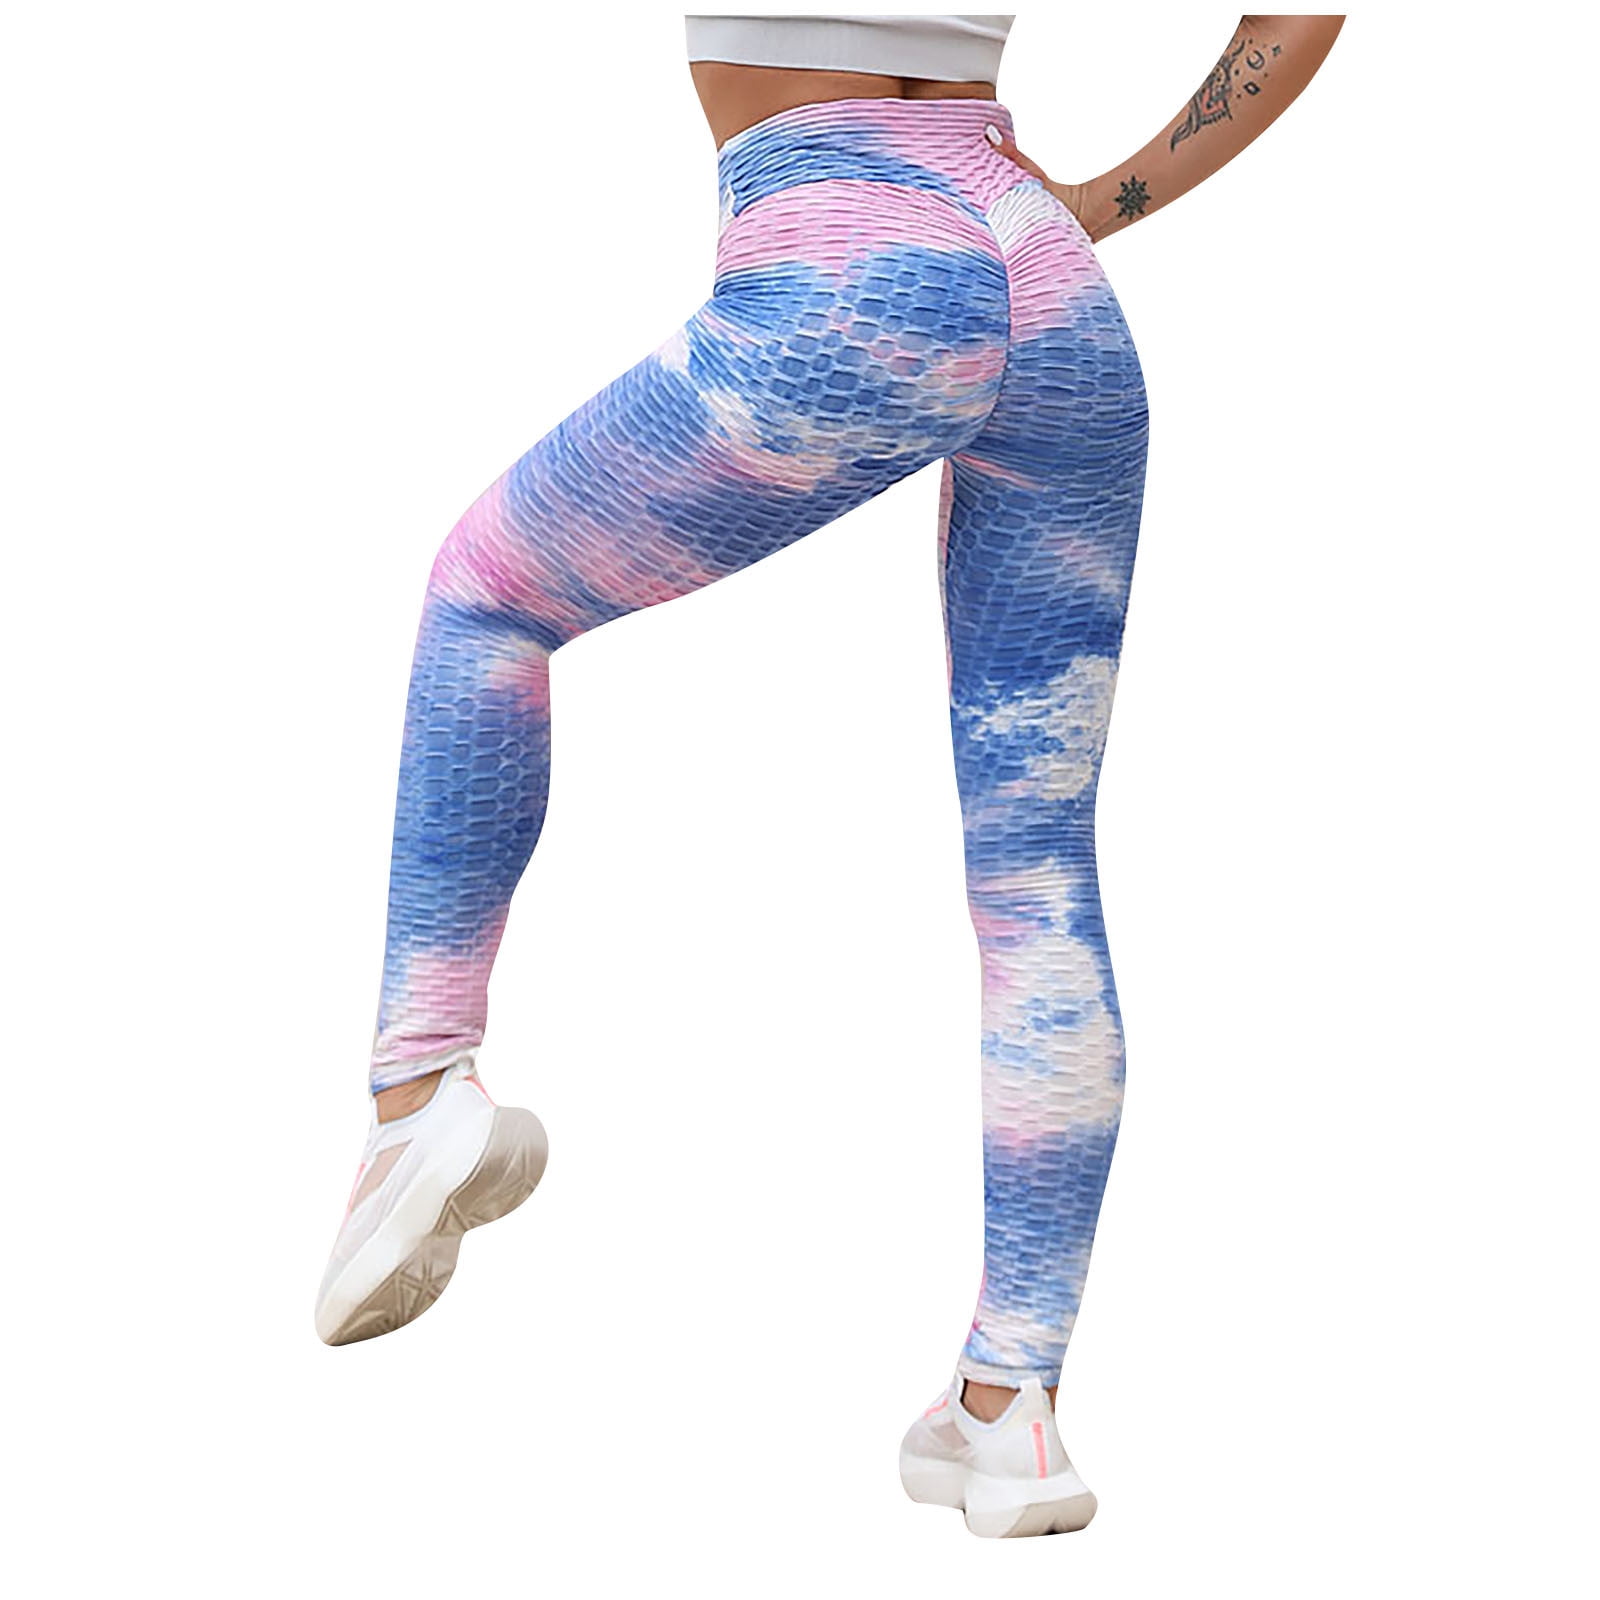 Get Fit with Stylish Women's Leggings and Yoga Pants